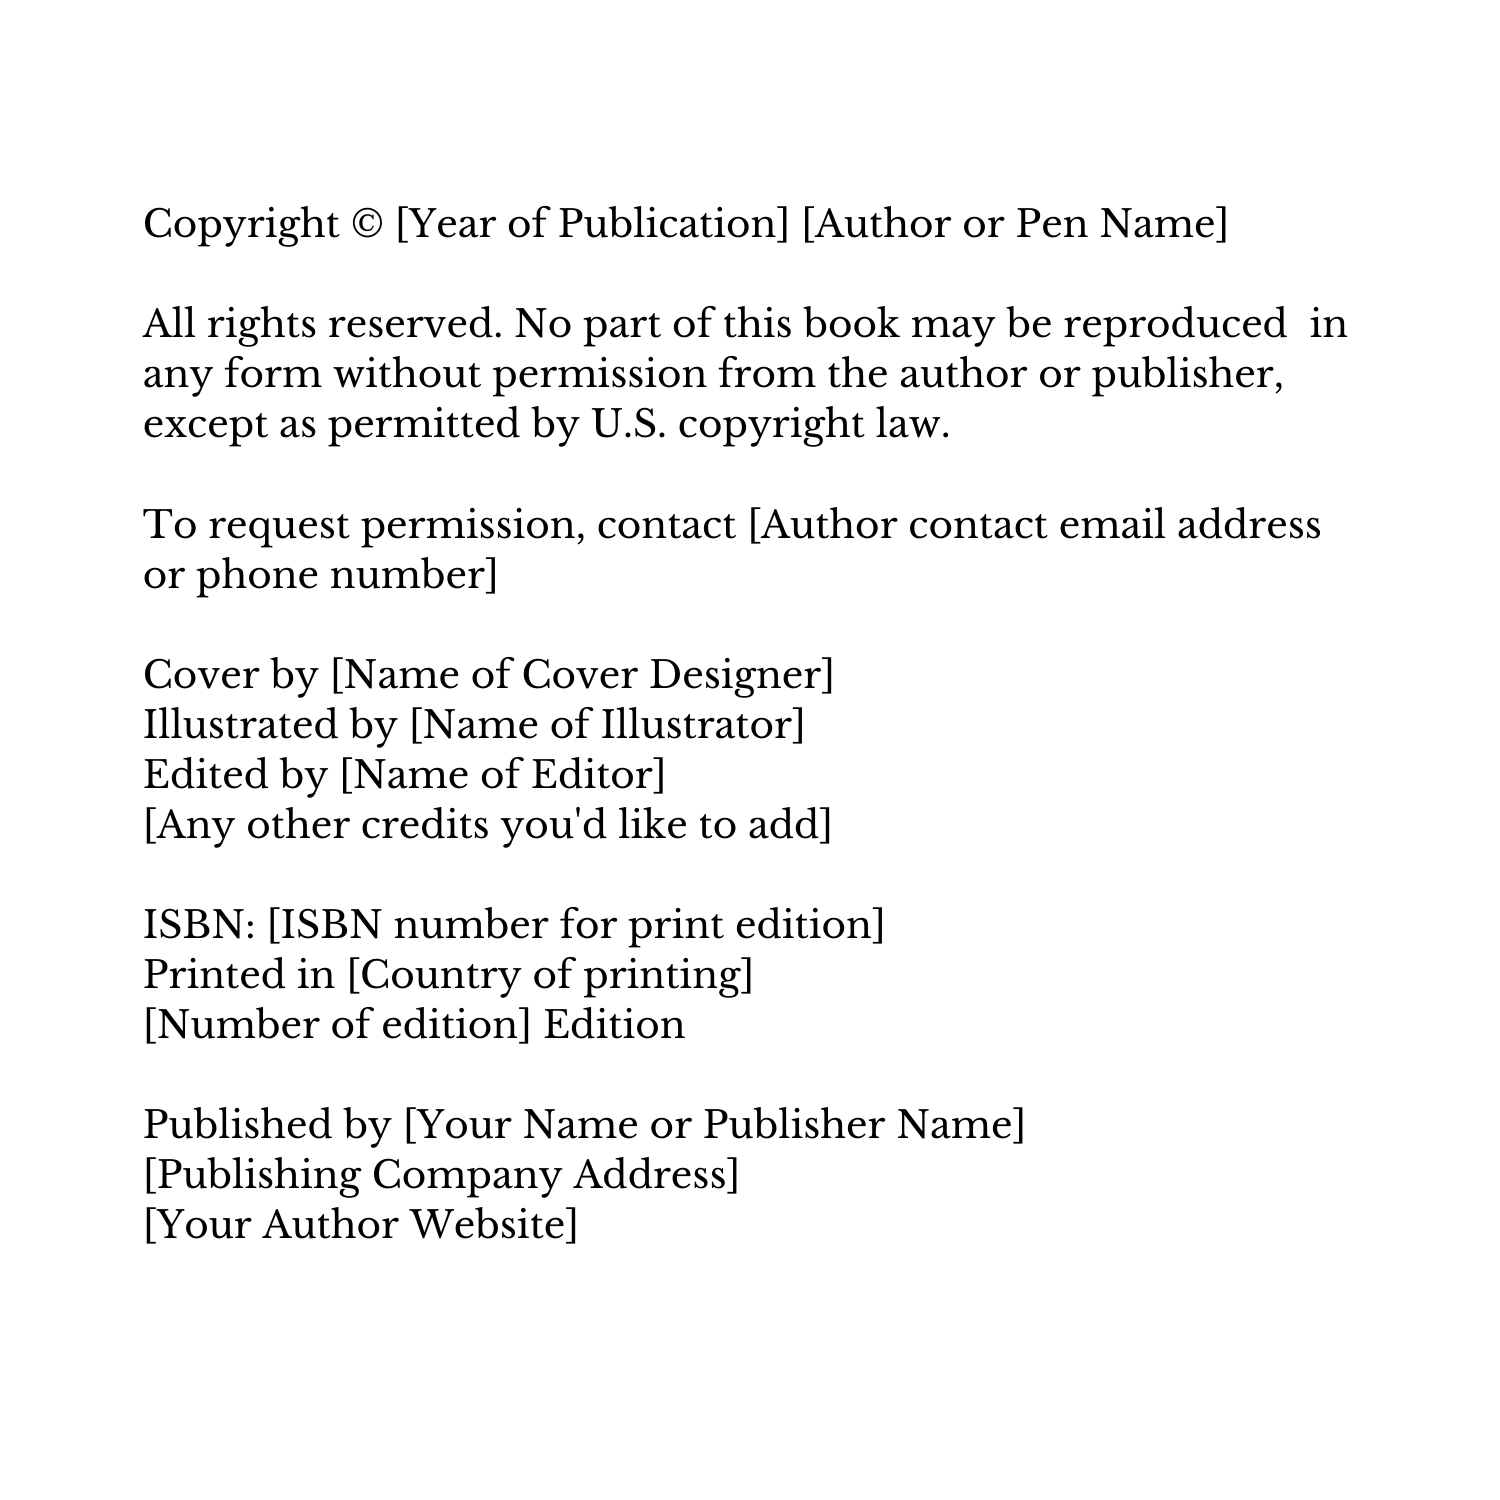 Copyright Page Template for Print Edition 